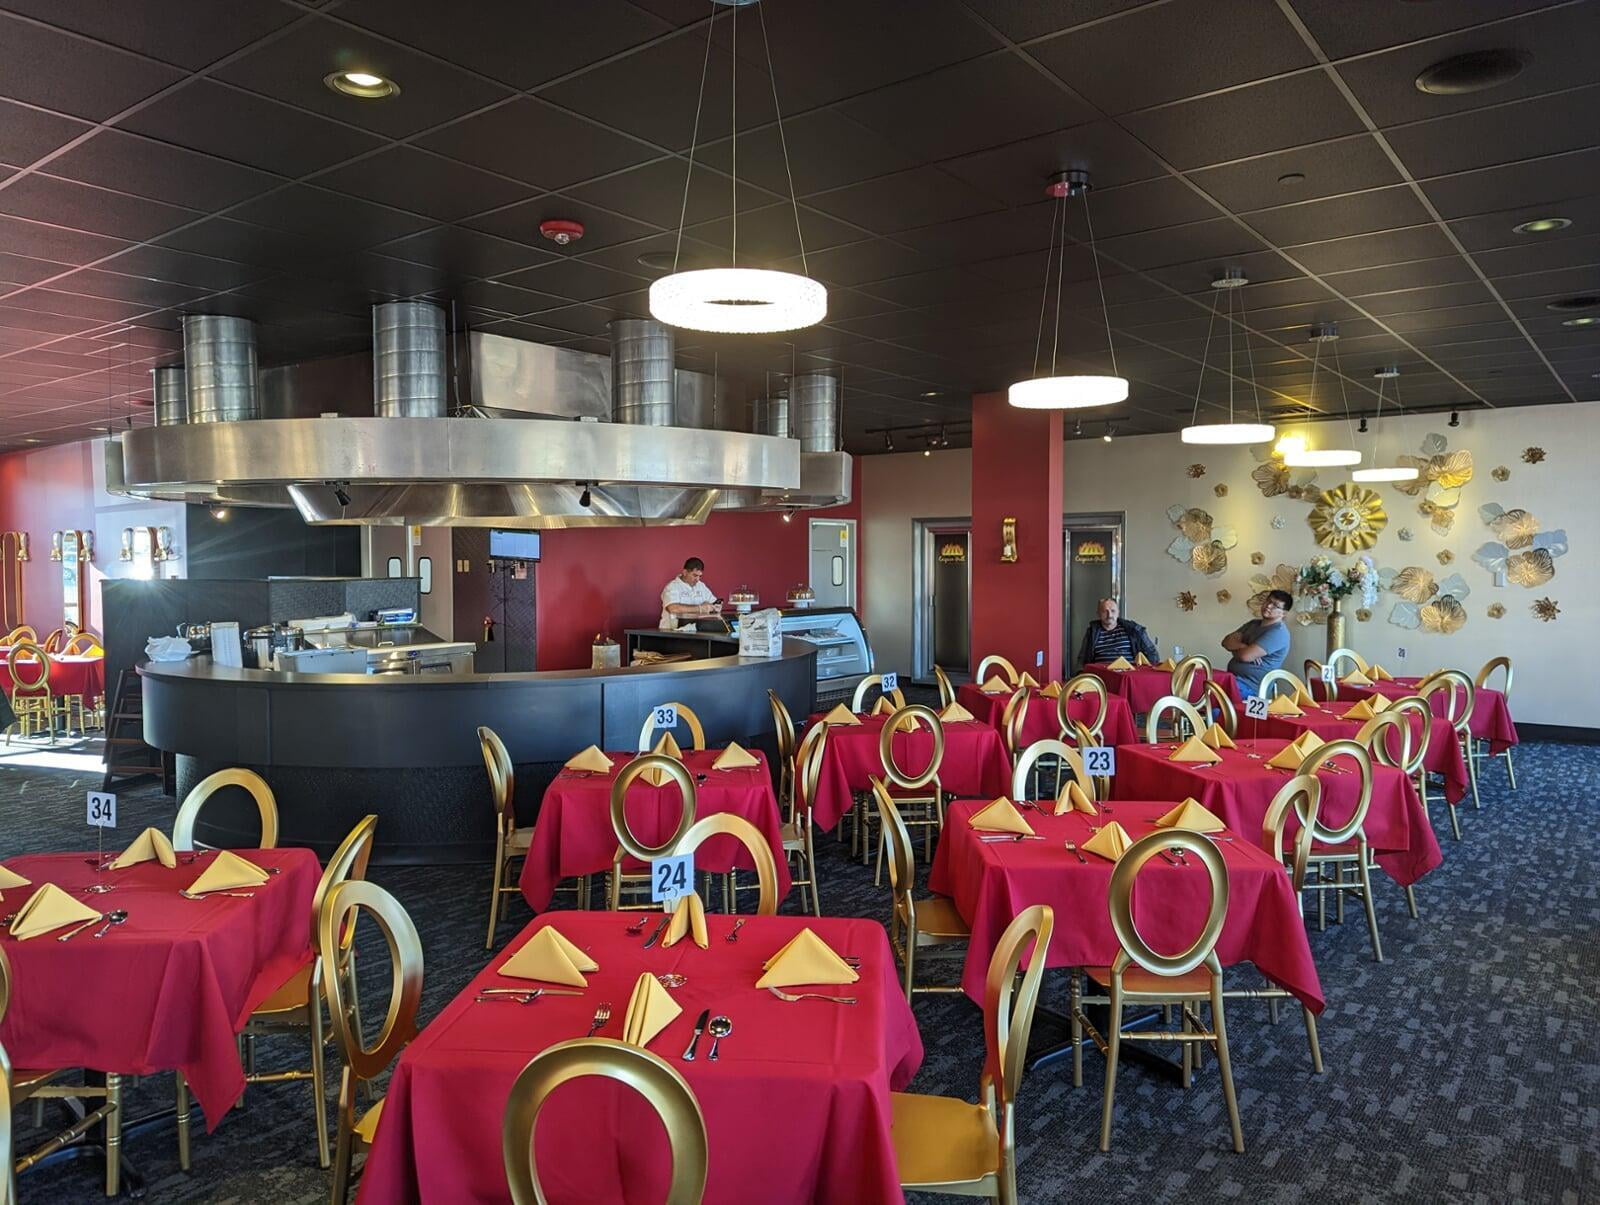 Caspian Grill restaurant saves over $25k with Monaire